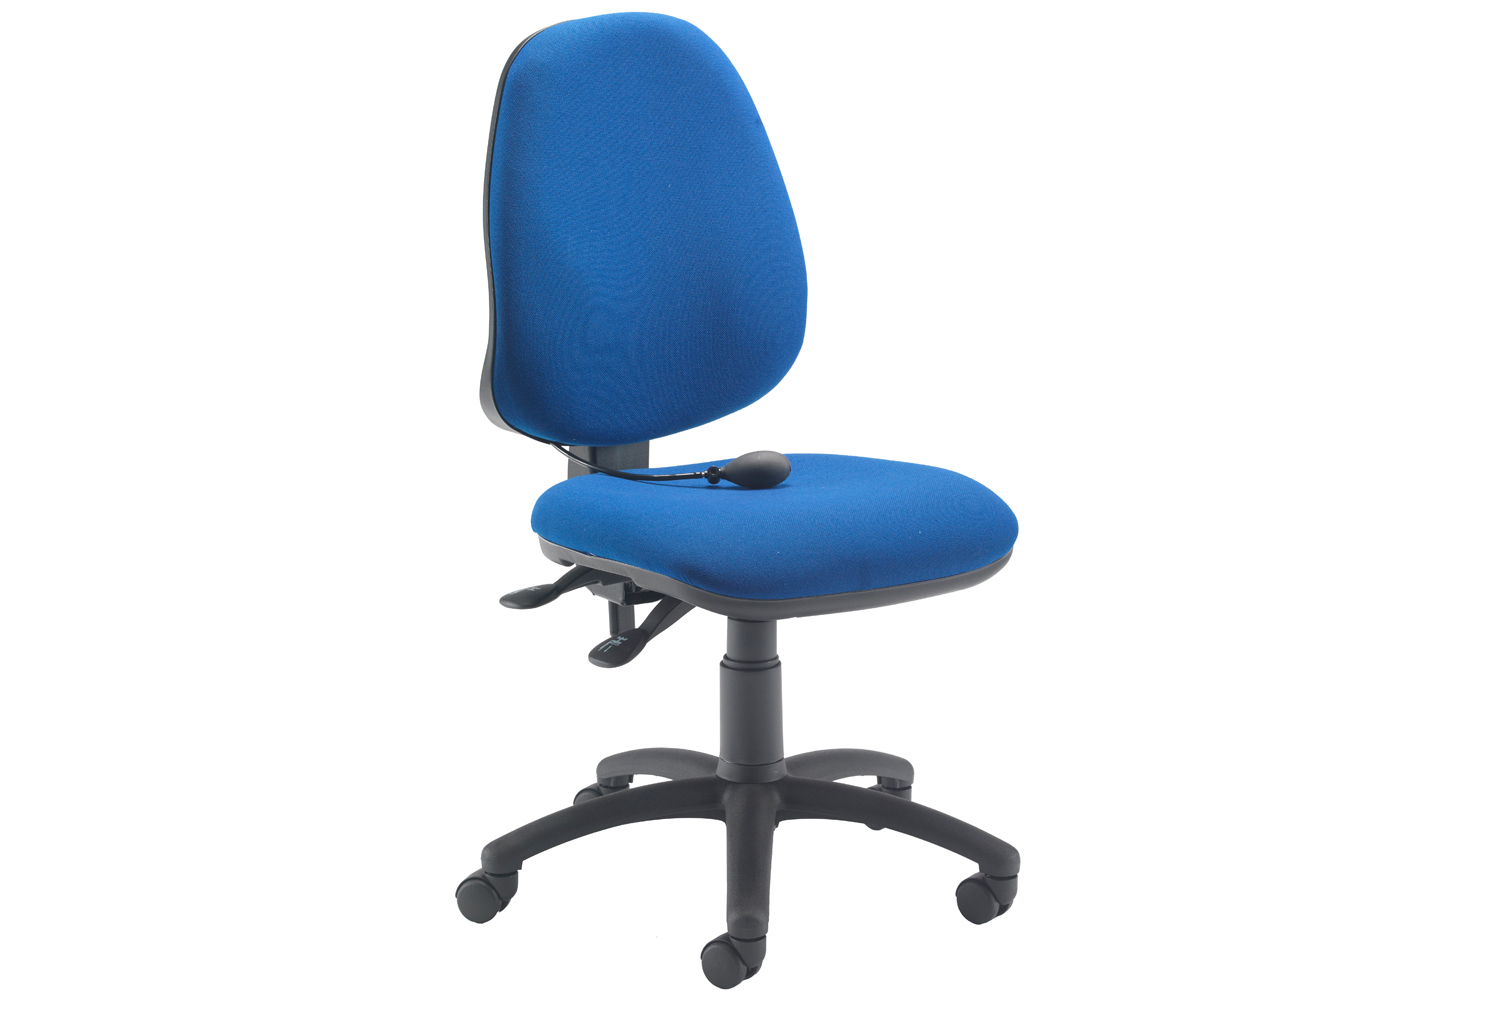 Orchid Lumbar Pump Ergonomic Operator Office Chair, Blue, Fully Installed